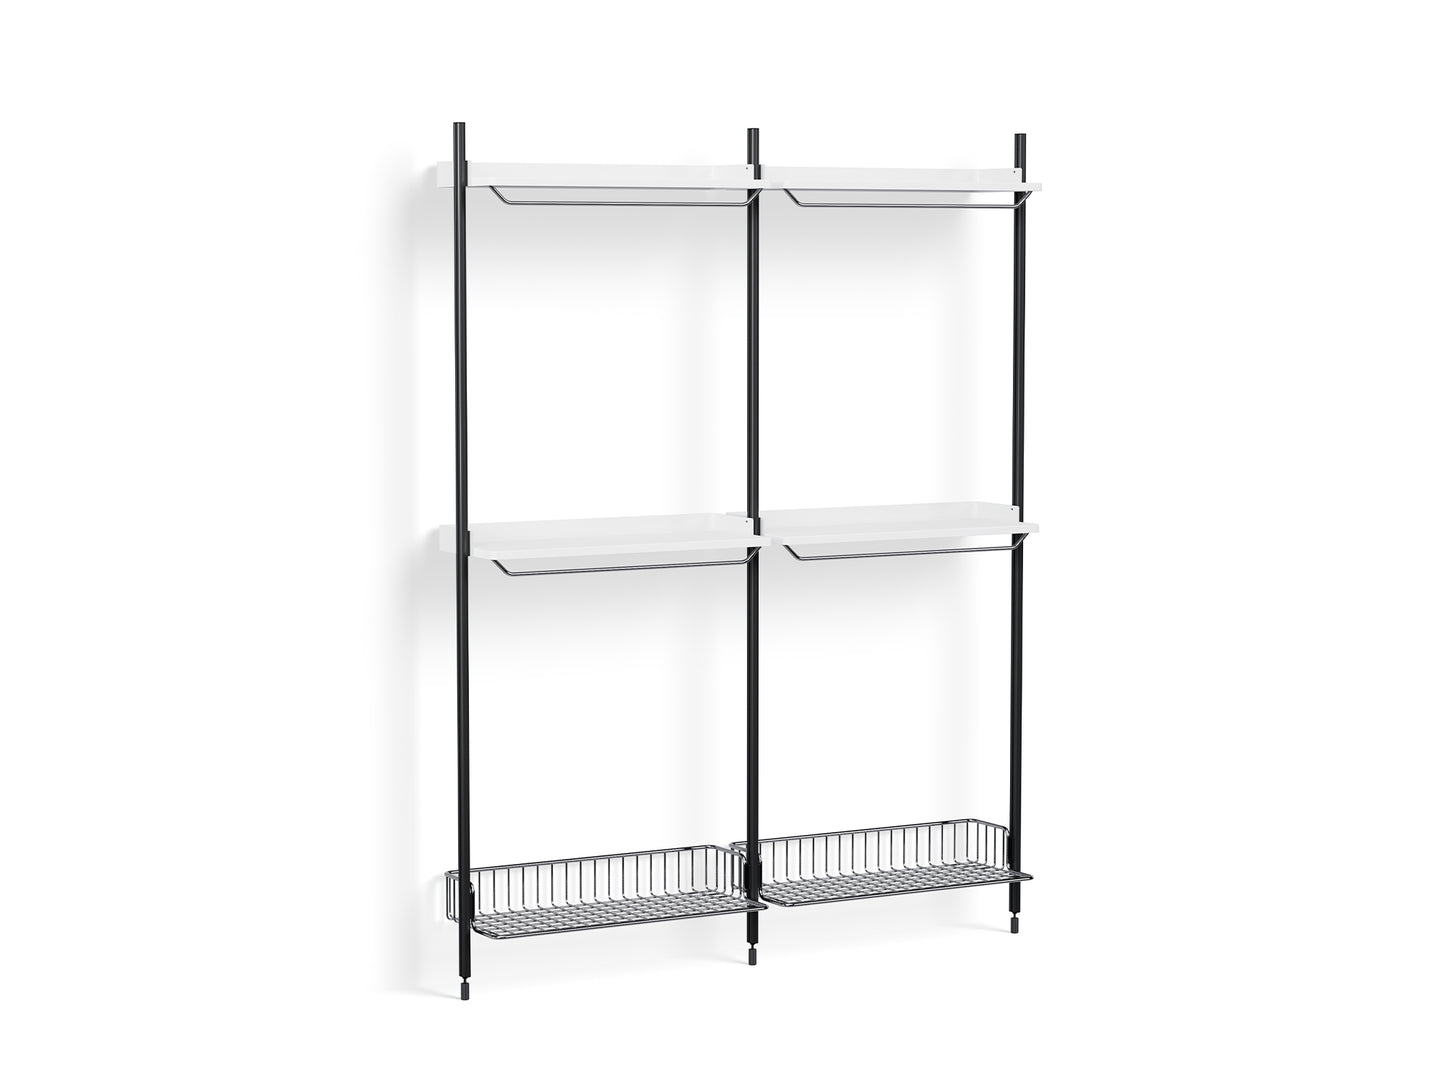 Pier System 1032 by HAY - Black Anodised Aluminium Uprights / PS White with Chromed Wire Shelf